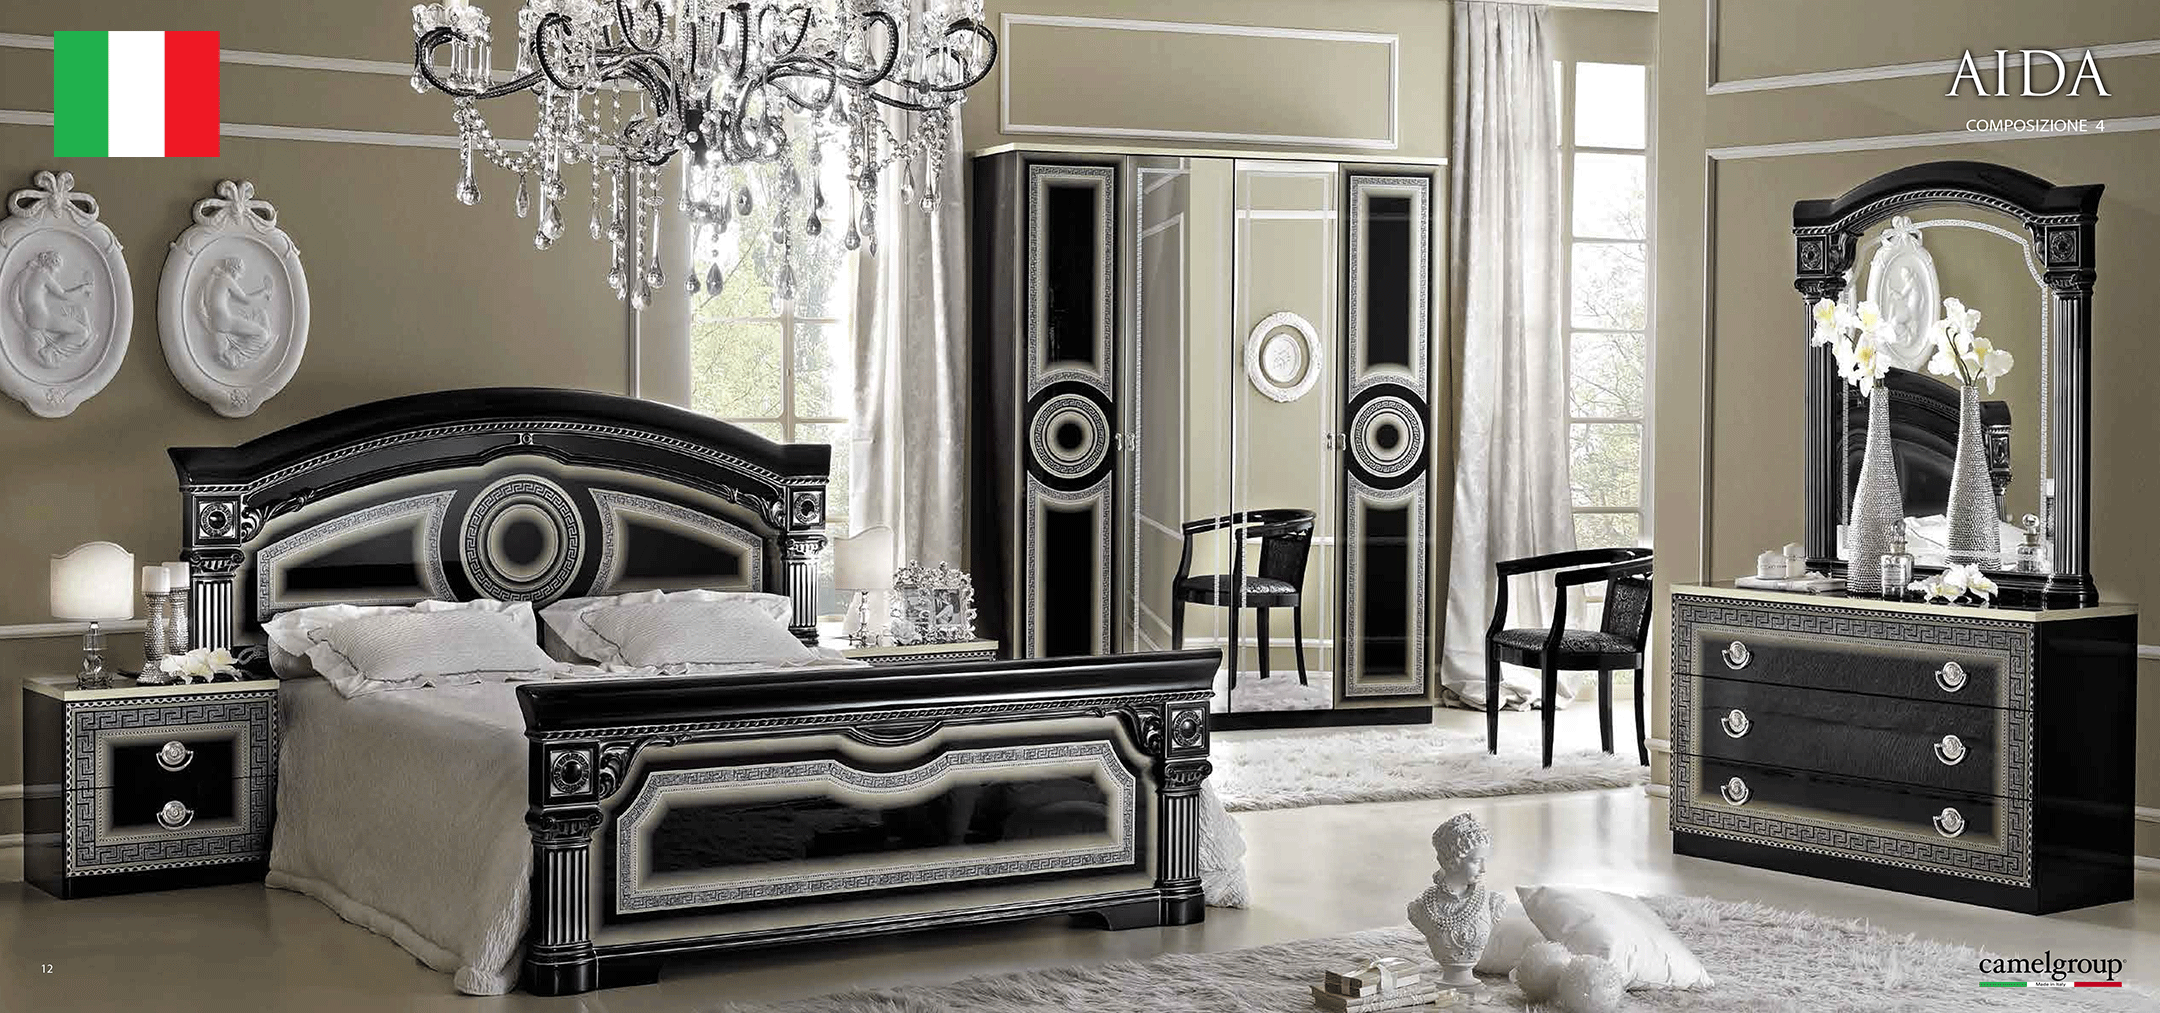 Bedroom Furniture Dressers and Chests Aida Bedroom Black/Silver, Camelgroup Italy